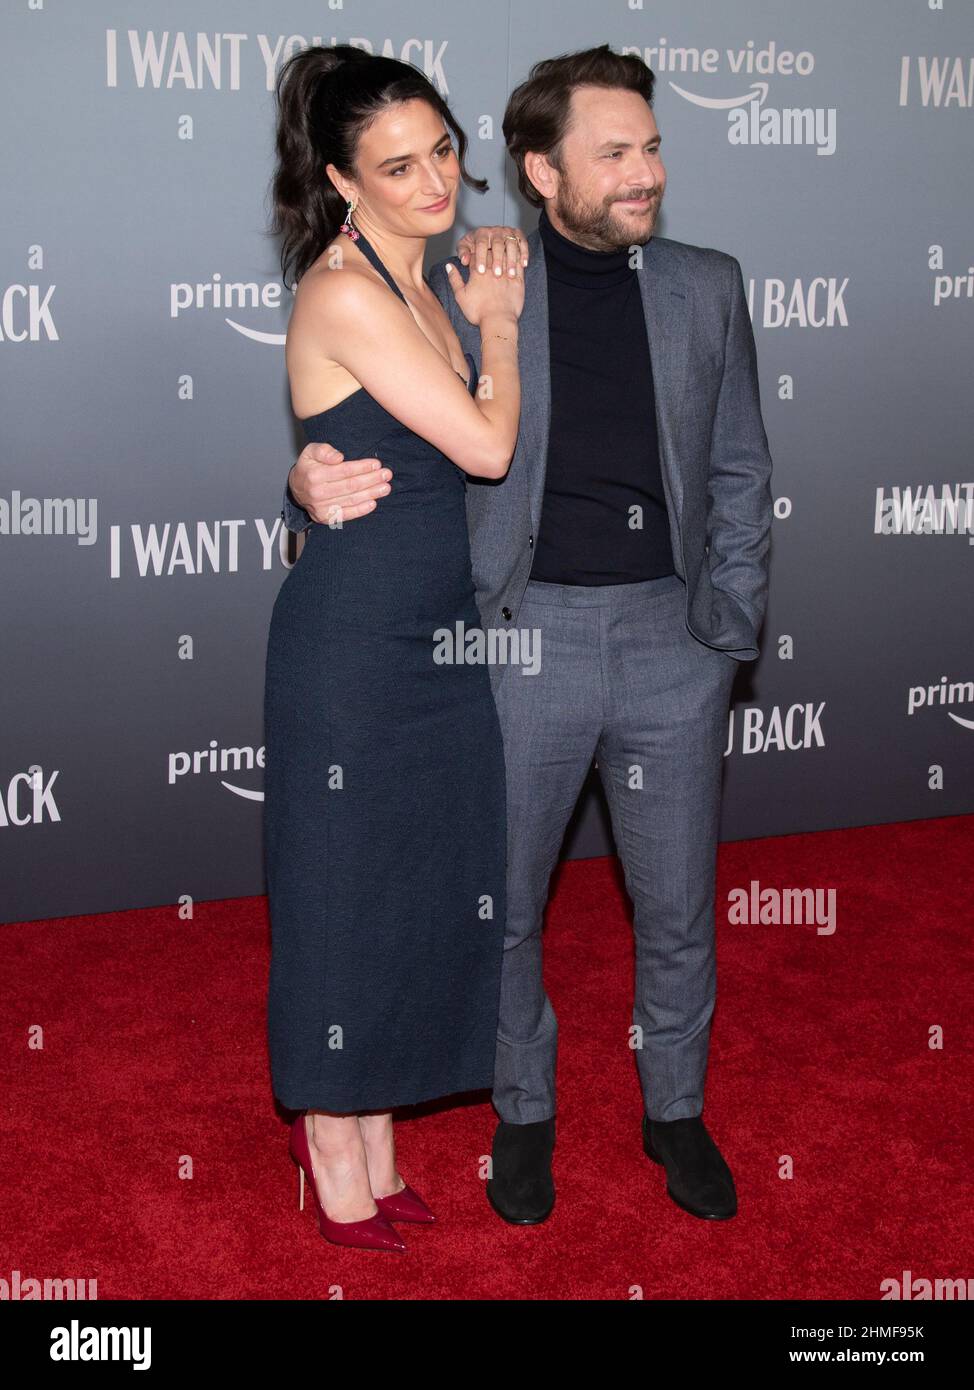 Jenny Slate, Charlie Day on Going Full Rom-Com in 'I Want You Back' – The  Hollywood Reporter